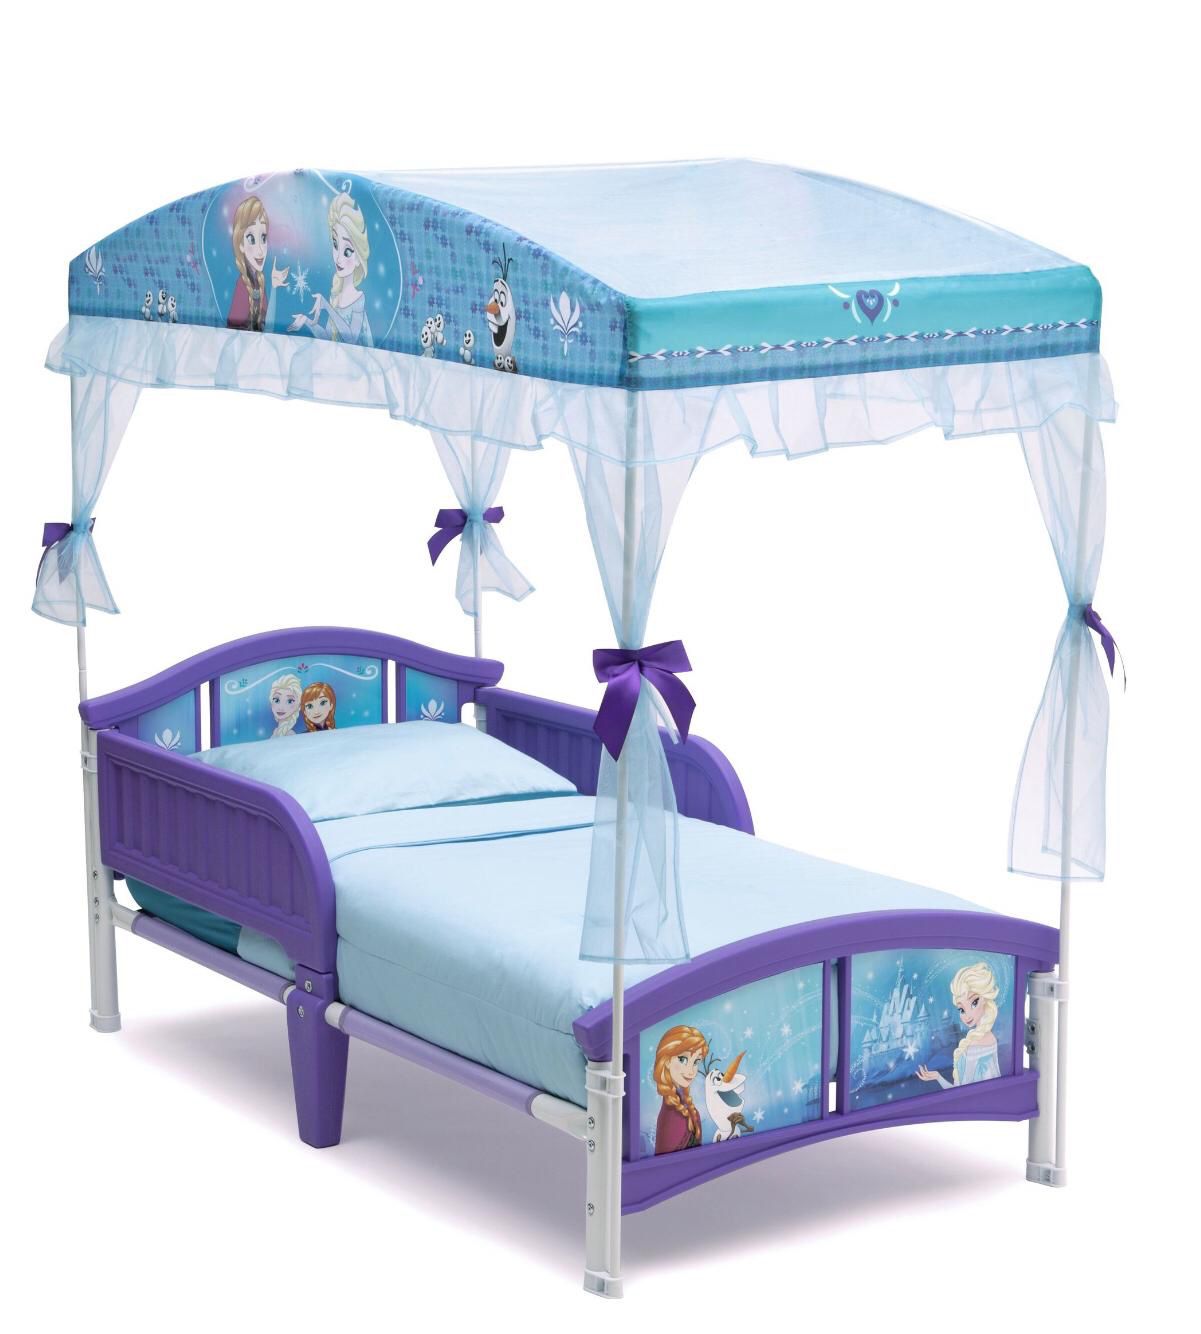 Toddler Canopy (not included mattress)